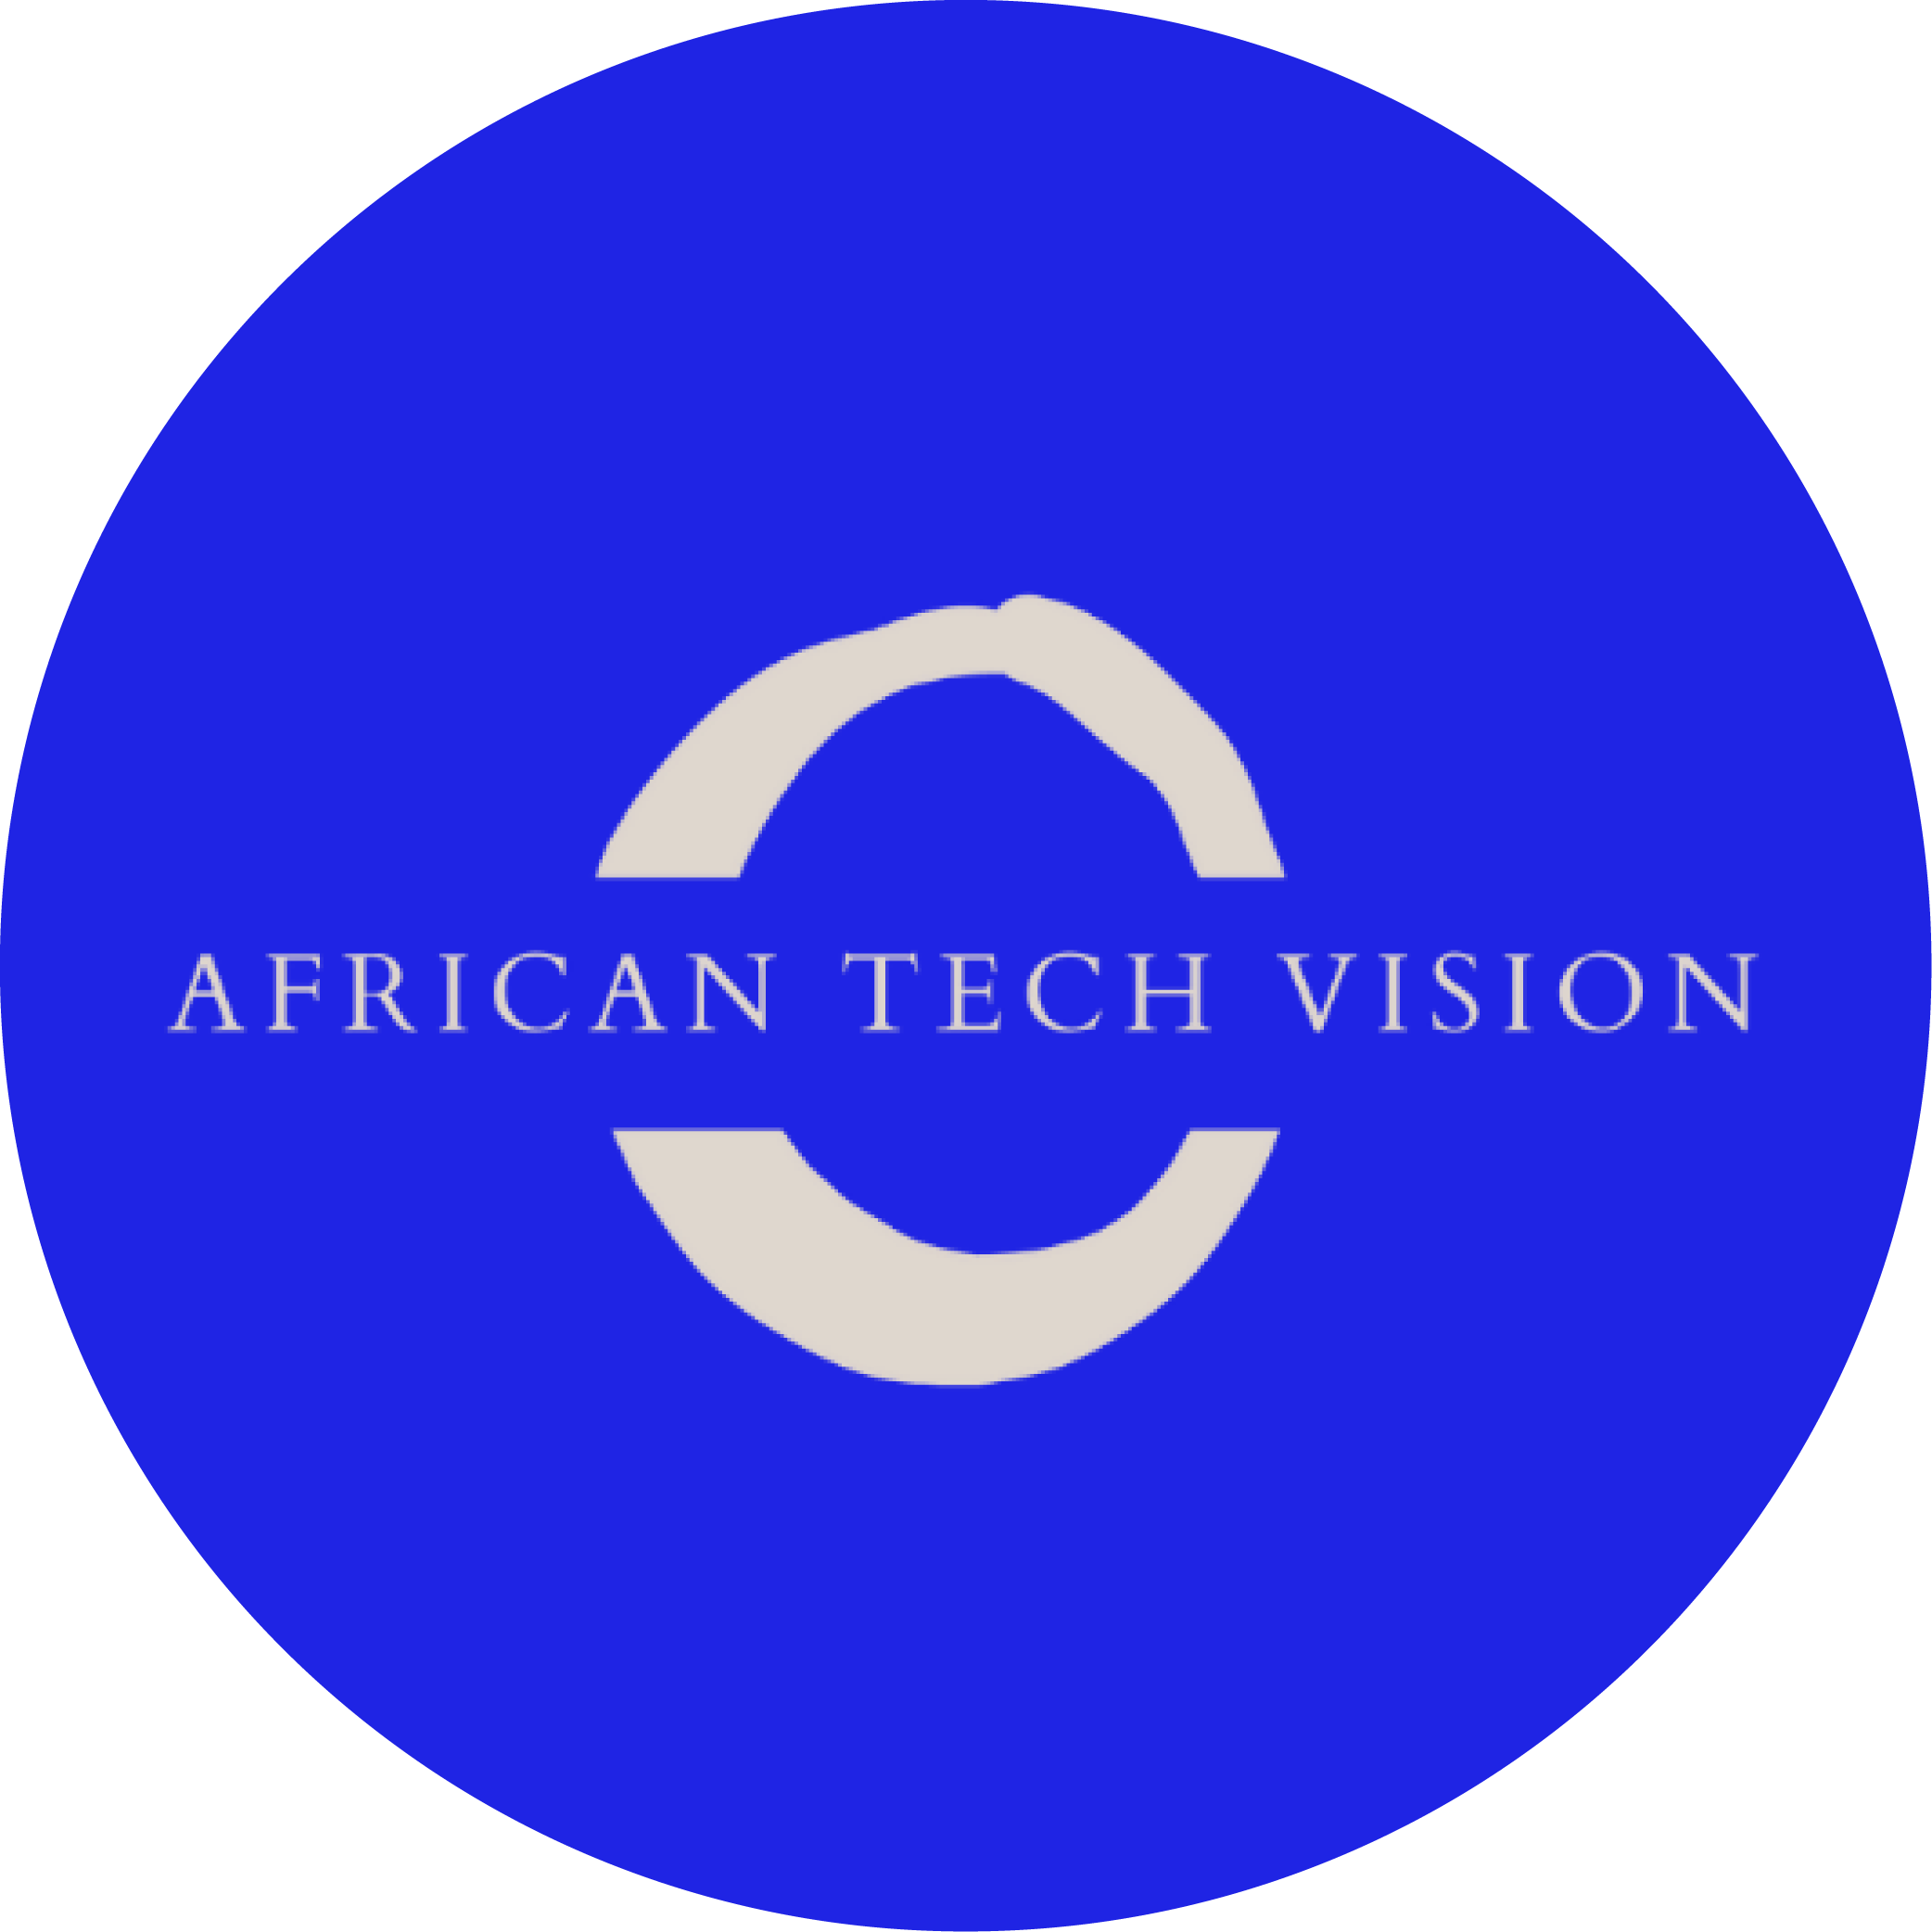 The African Tech Vision